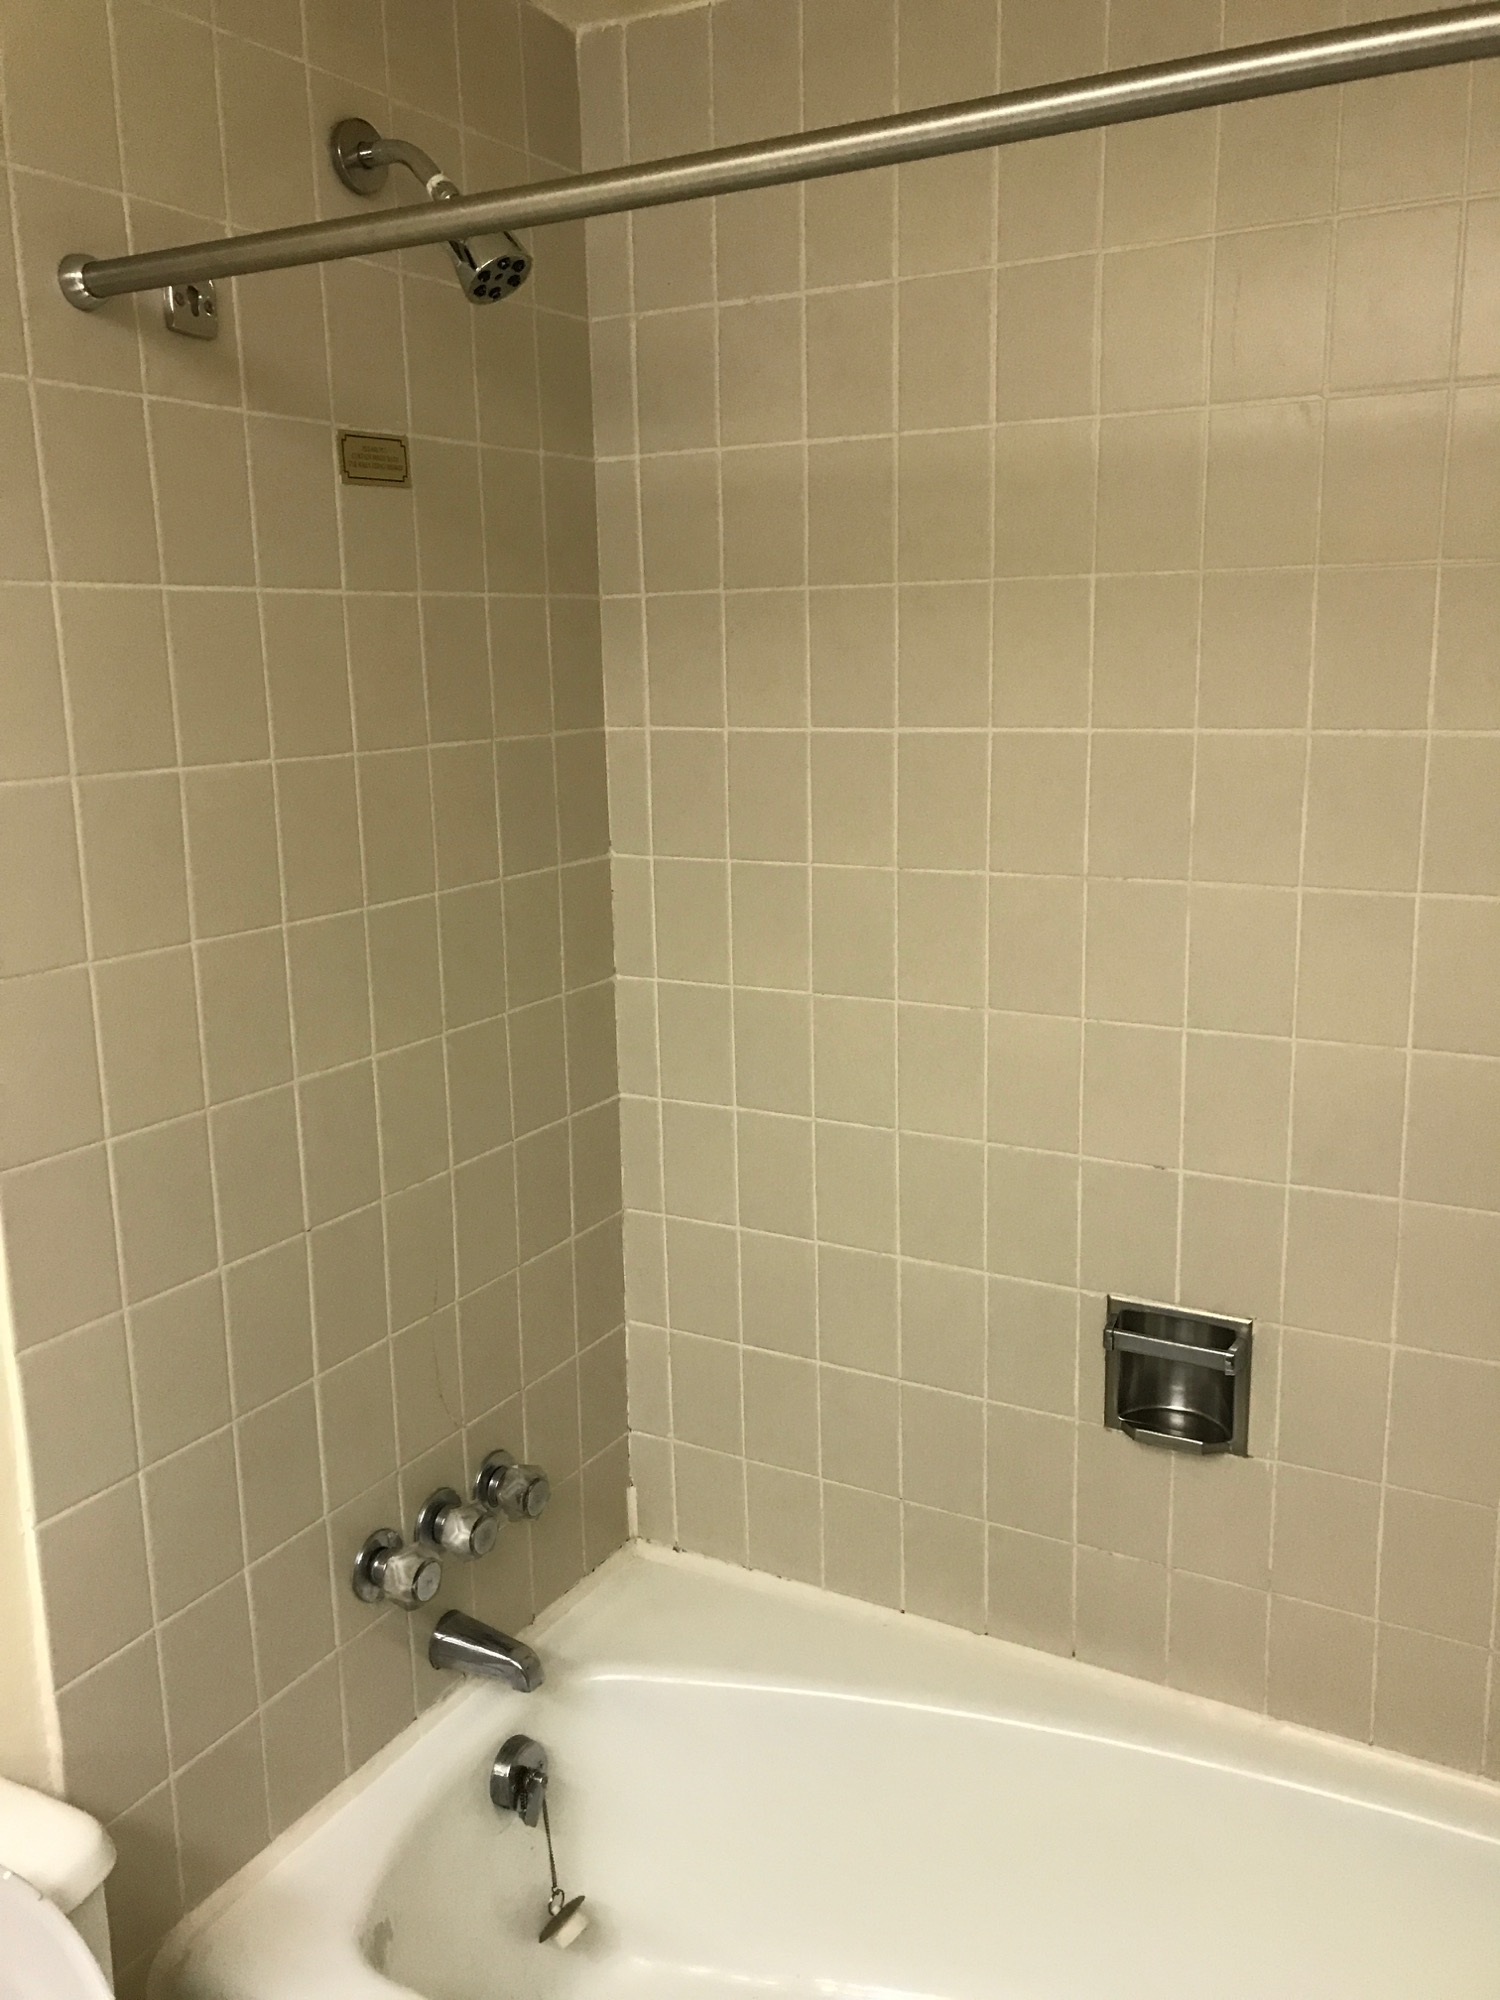 a shower and tub in a bathroom